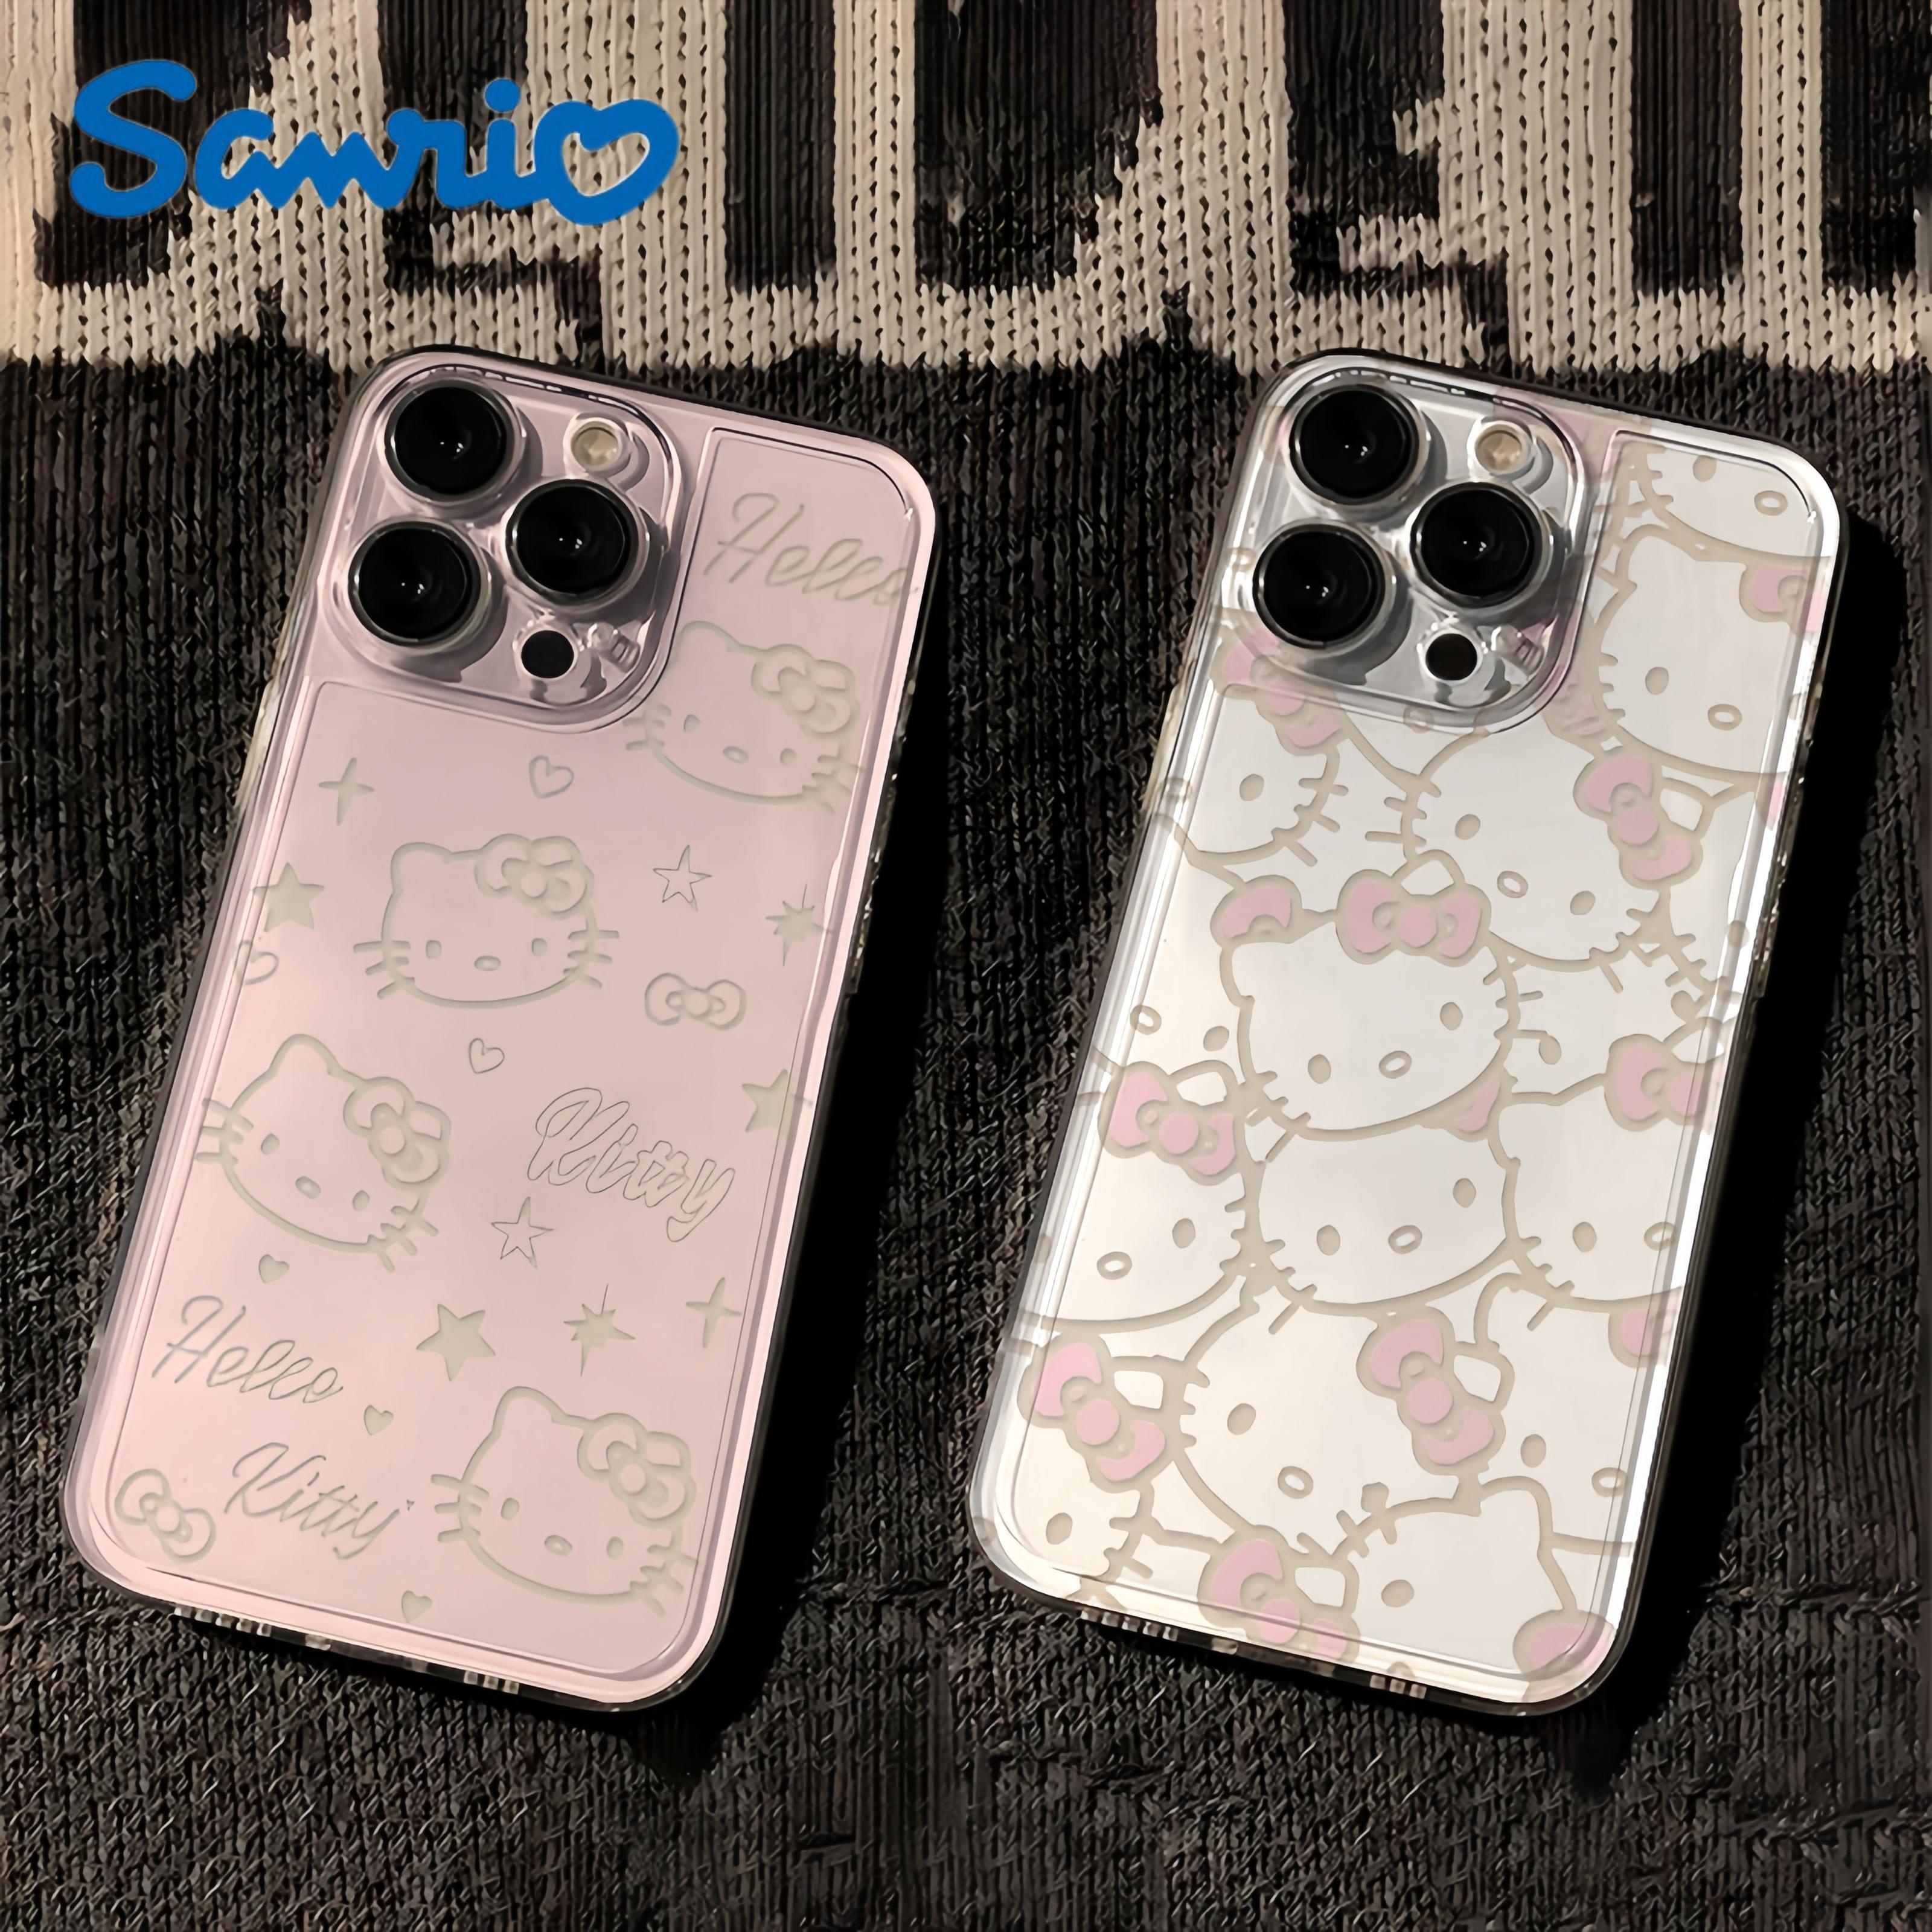 

Hello Kitty Cute Cartoon Pink Silicone Phone Case For Apple, Transparent Anti-scratch Shockproof Soft Cover